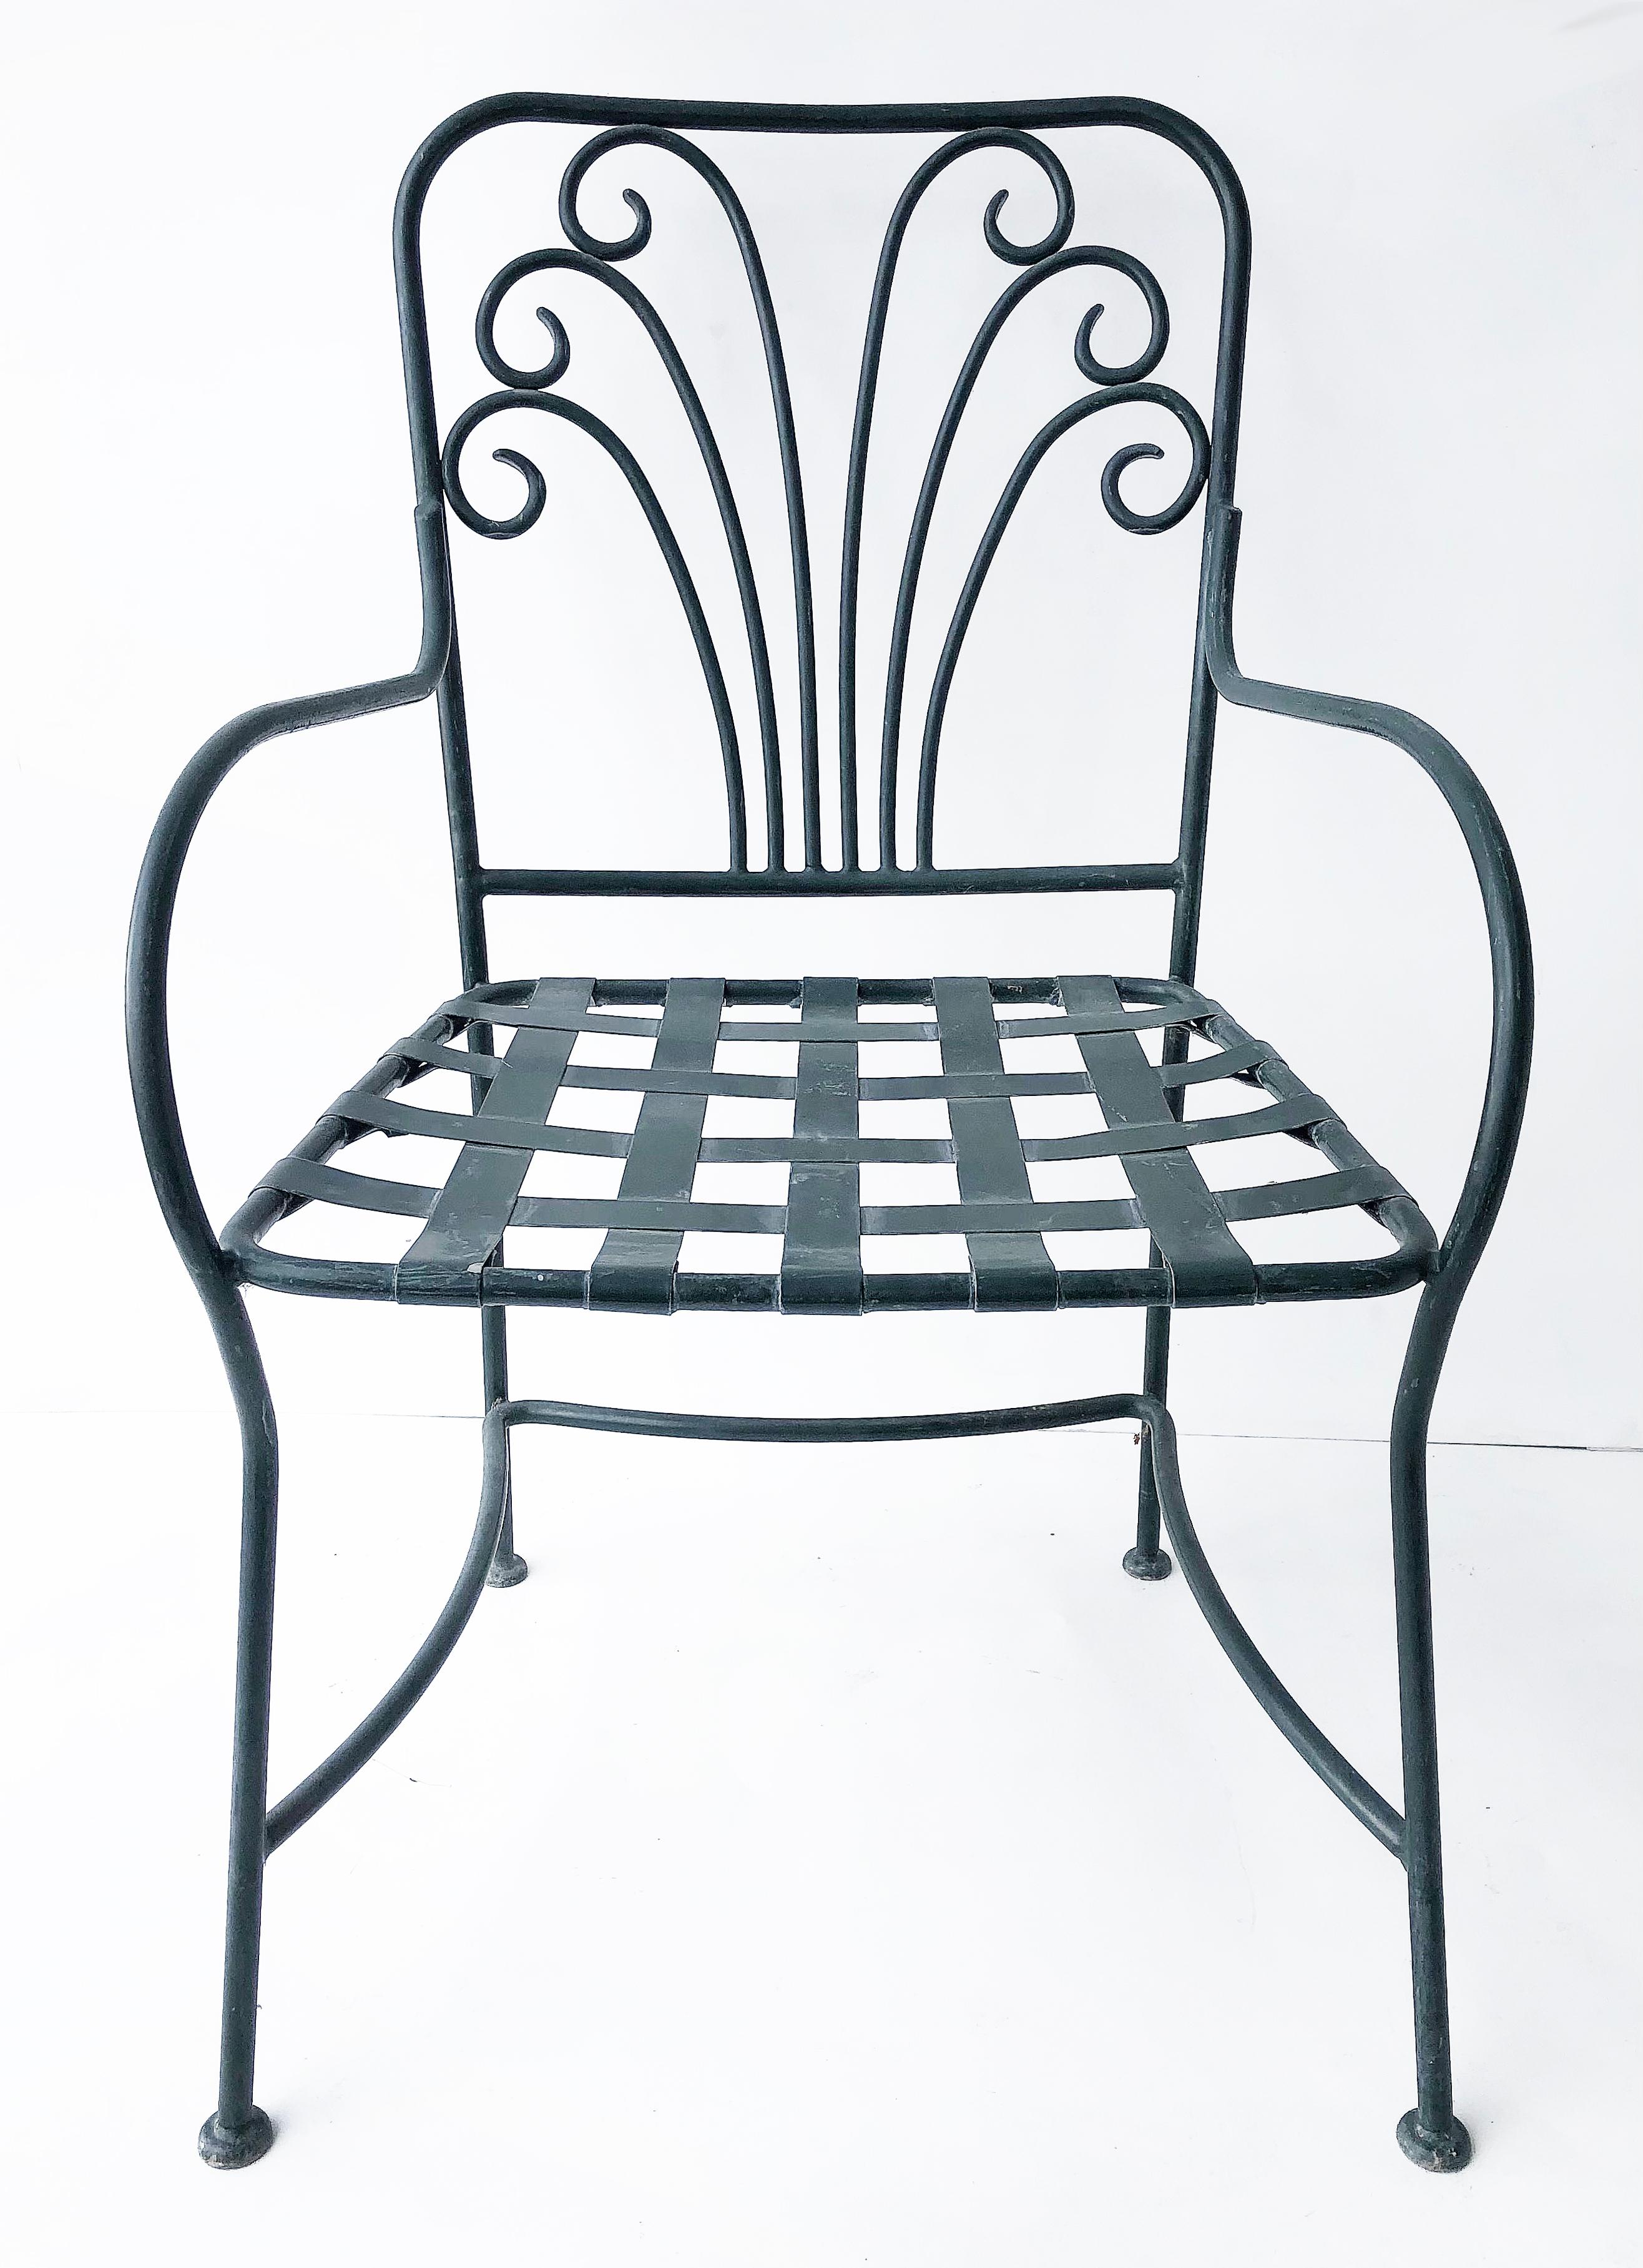 Set of eight powder-coated garden/patio dining chairs

Offered for sale is a set of eight powder-coated garden patio chairs with scrollwork and woven metal seats. The chairs are nicely finished however, some of the paint on the slats of the seats